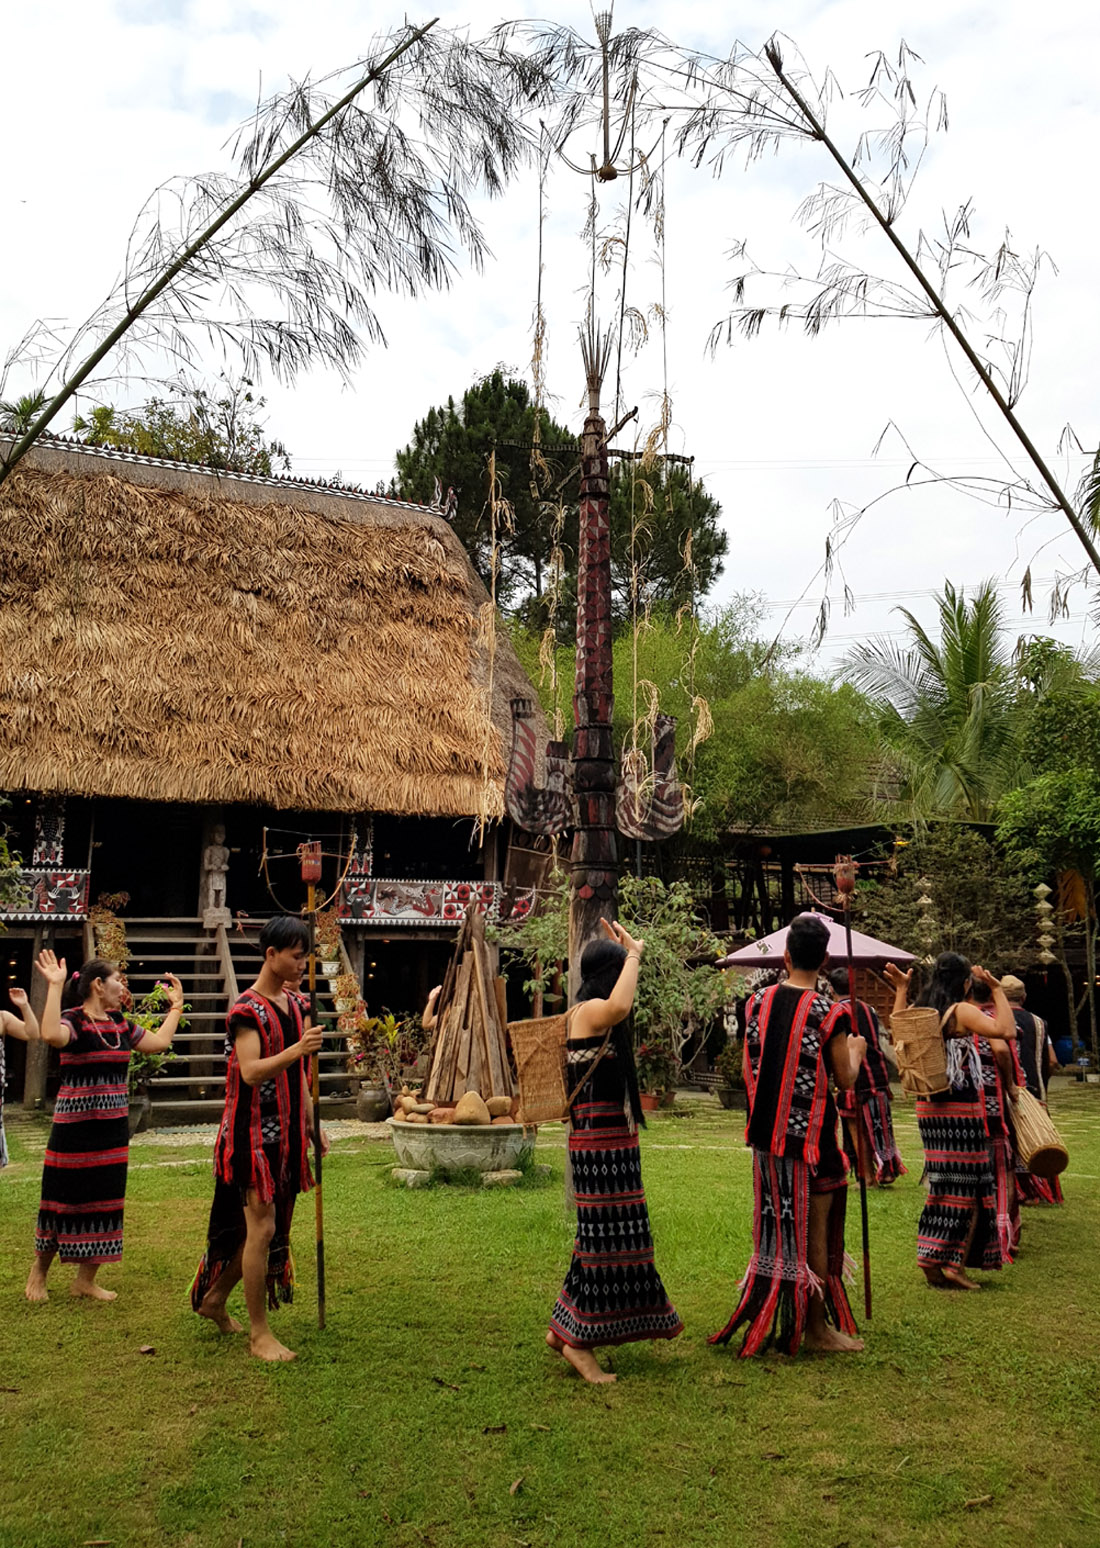 Co Tu ethnic artisans are invited to perform Zèng weaving, and gongs, etc., at the traditional Guol house.